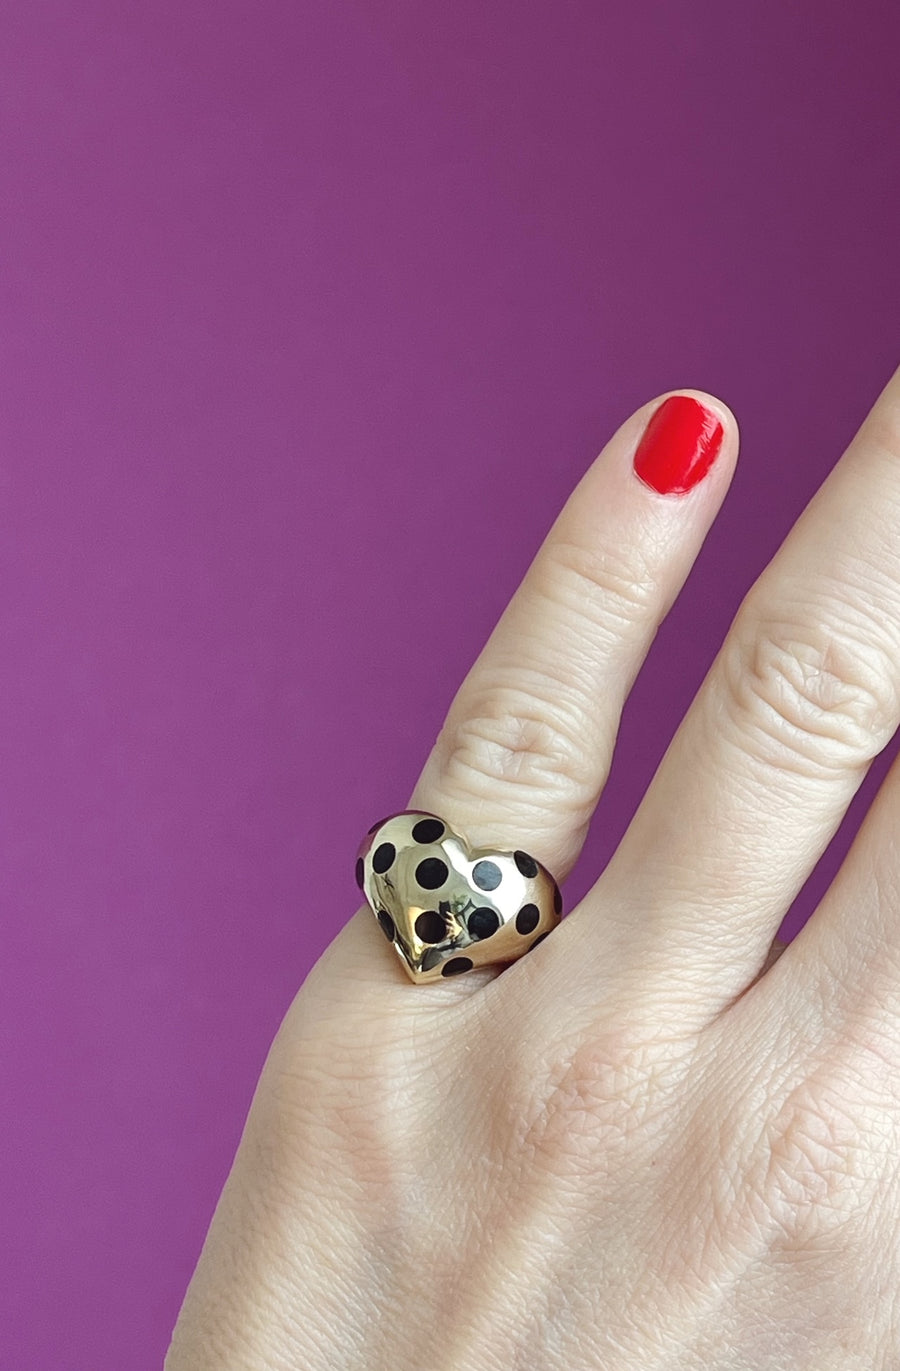 gold chubby heart ring with black polka dots on a pinky finger on a pink background